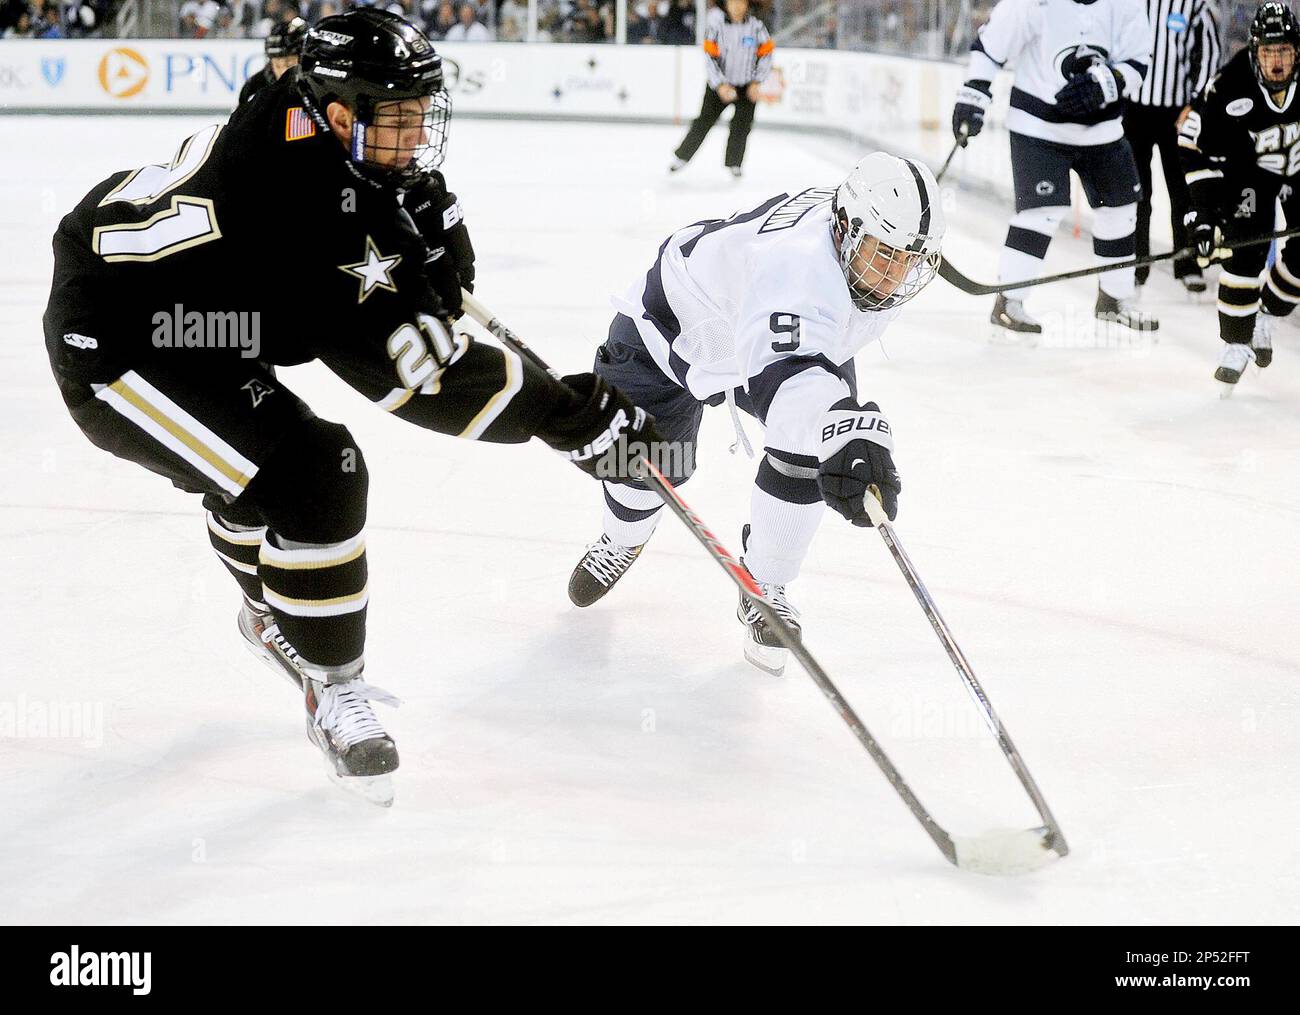 Armys Garret Peterson tries to stop Penn States David Goodwin during the Friday, October 11, 2013 opening game at Pegula Ice Arena